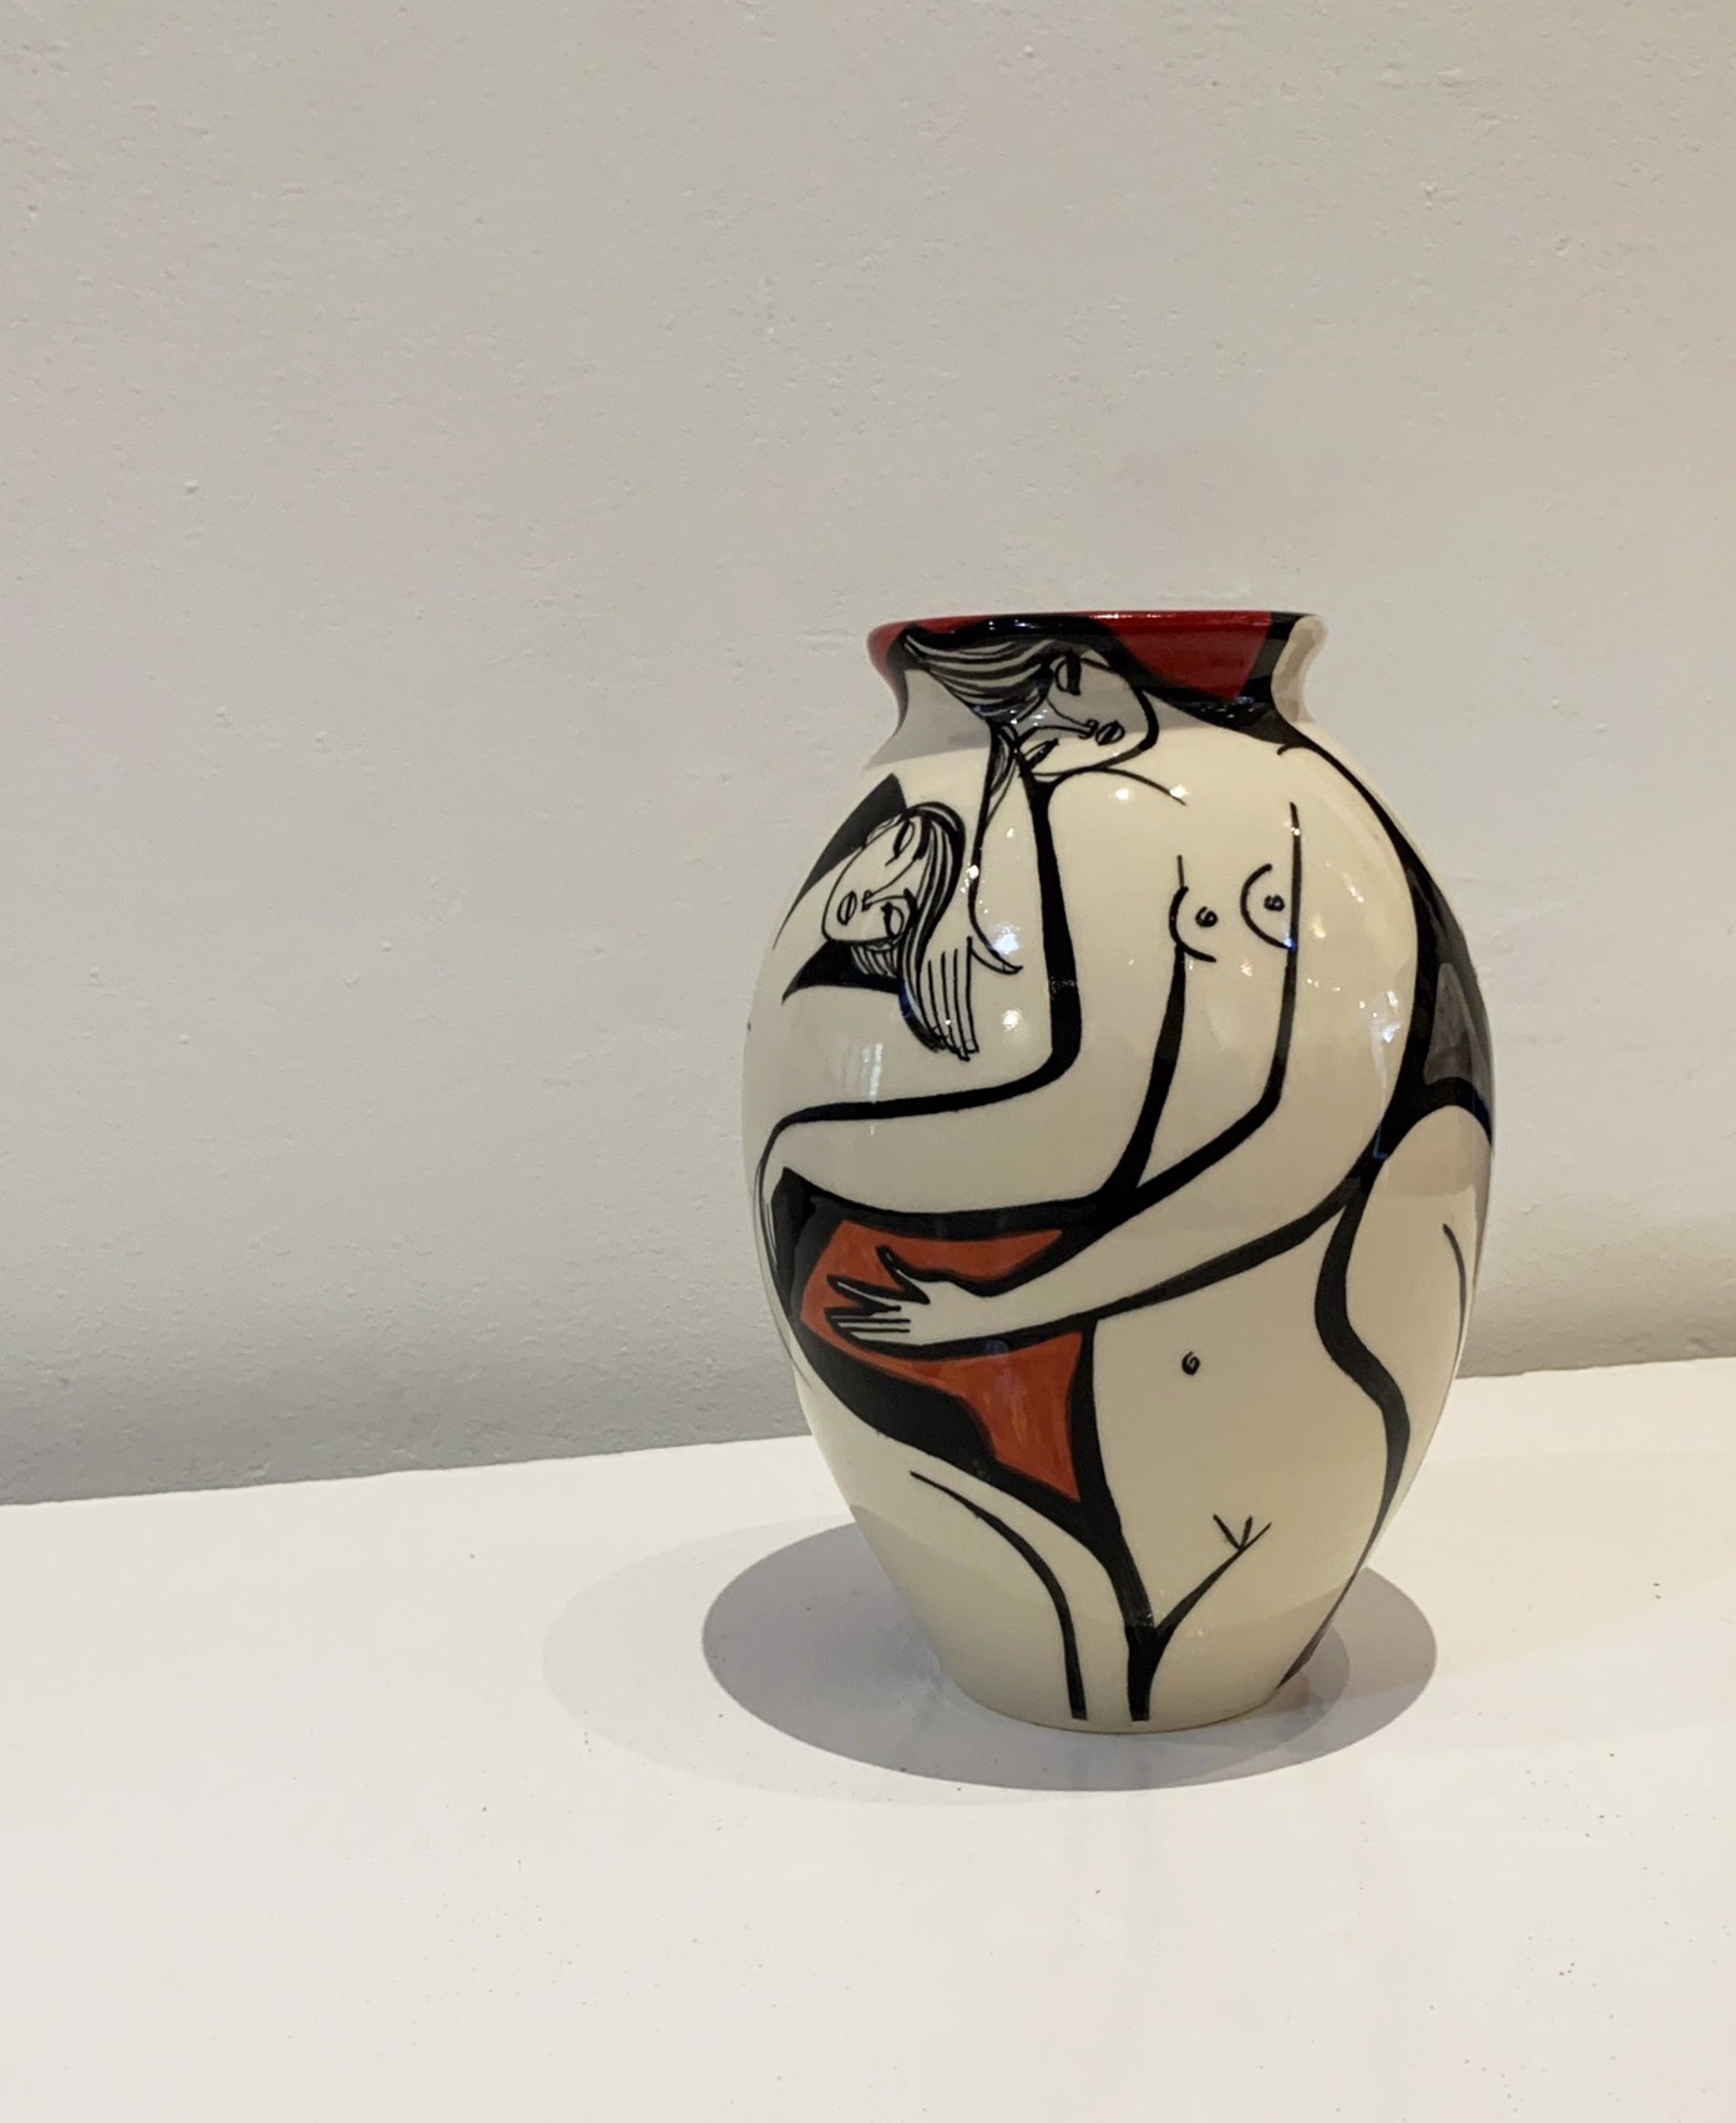 Three Graces Vase #5 by Ken and Tina Riesterer